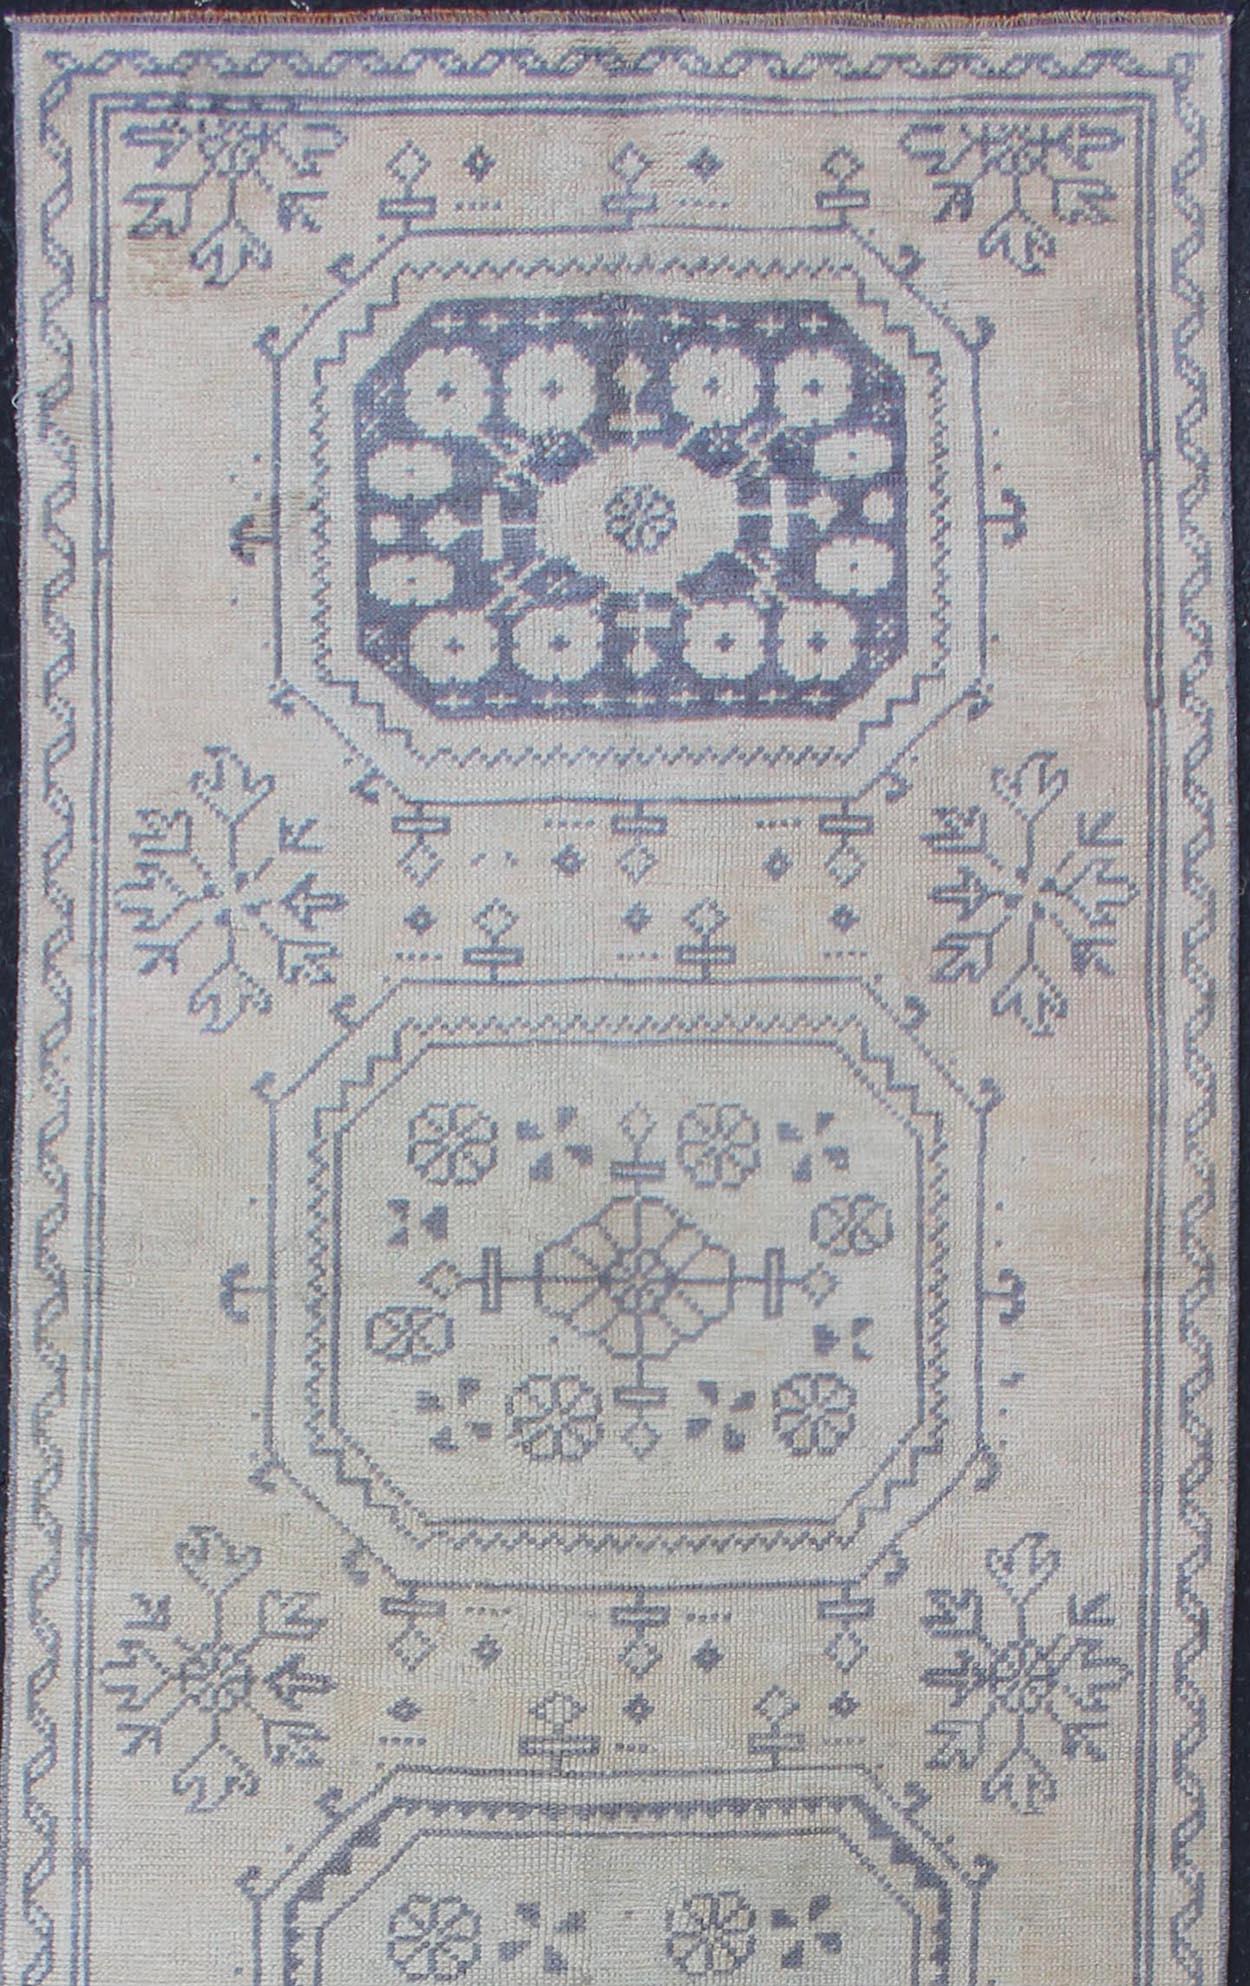 Oushak vintage rug from Turkey with medallion Geometric design, rug EN-179680, country of origin / type: Turkey / Oushak, circa 1940.

This vintage Turkish Oushak rug features a multi-medallion design flanked by floral motifs and an overall faded,